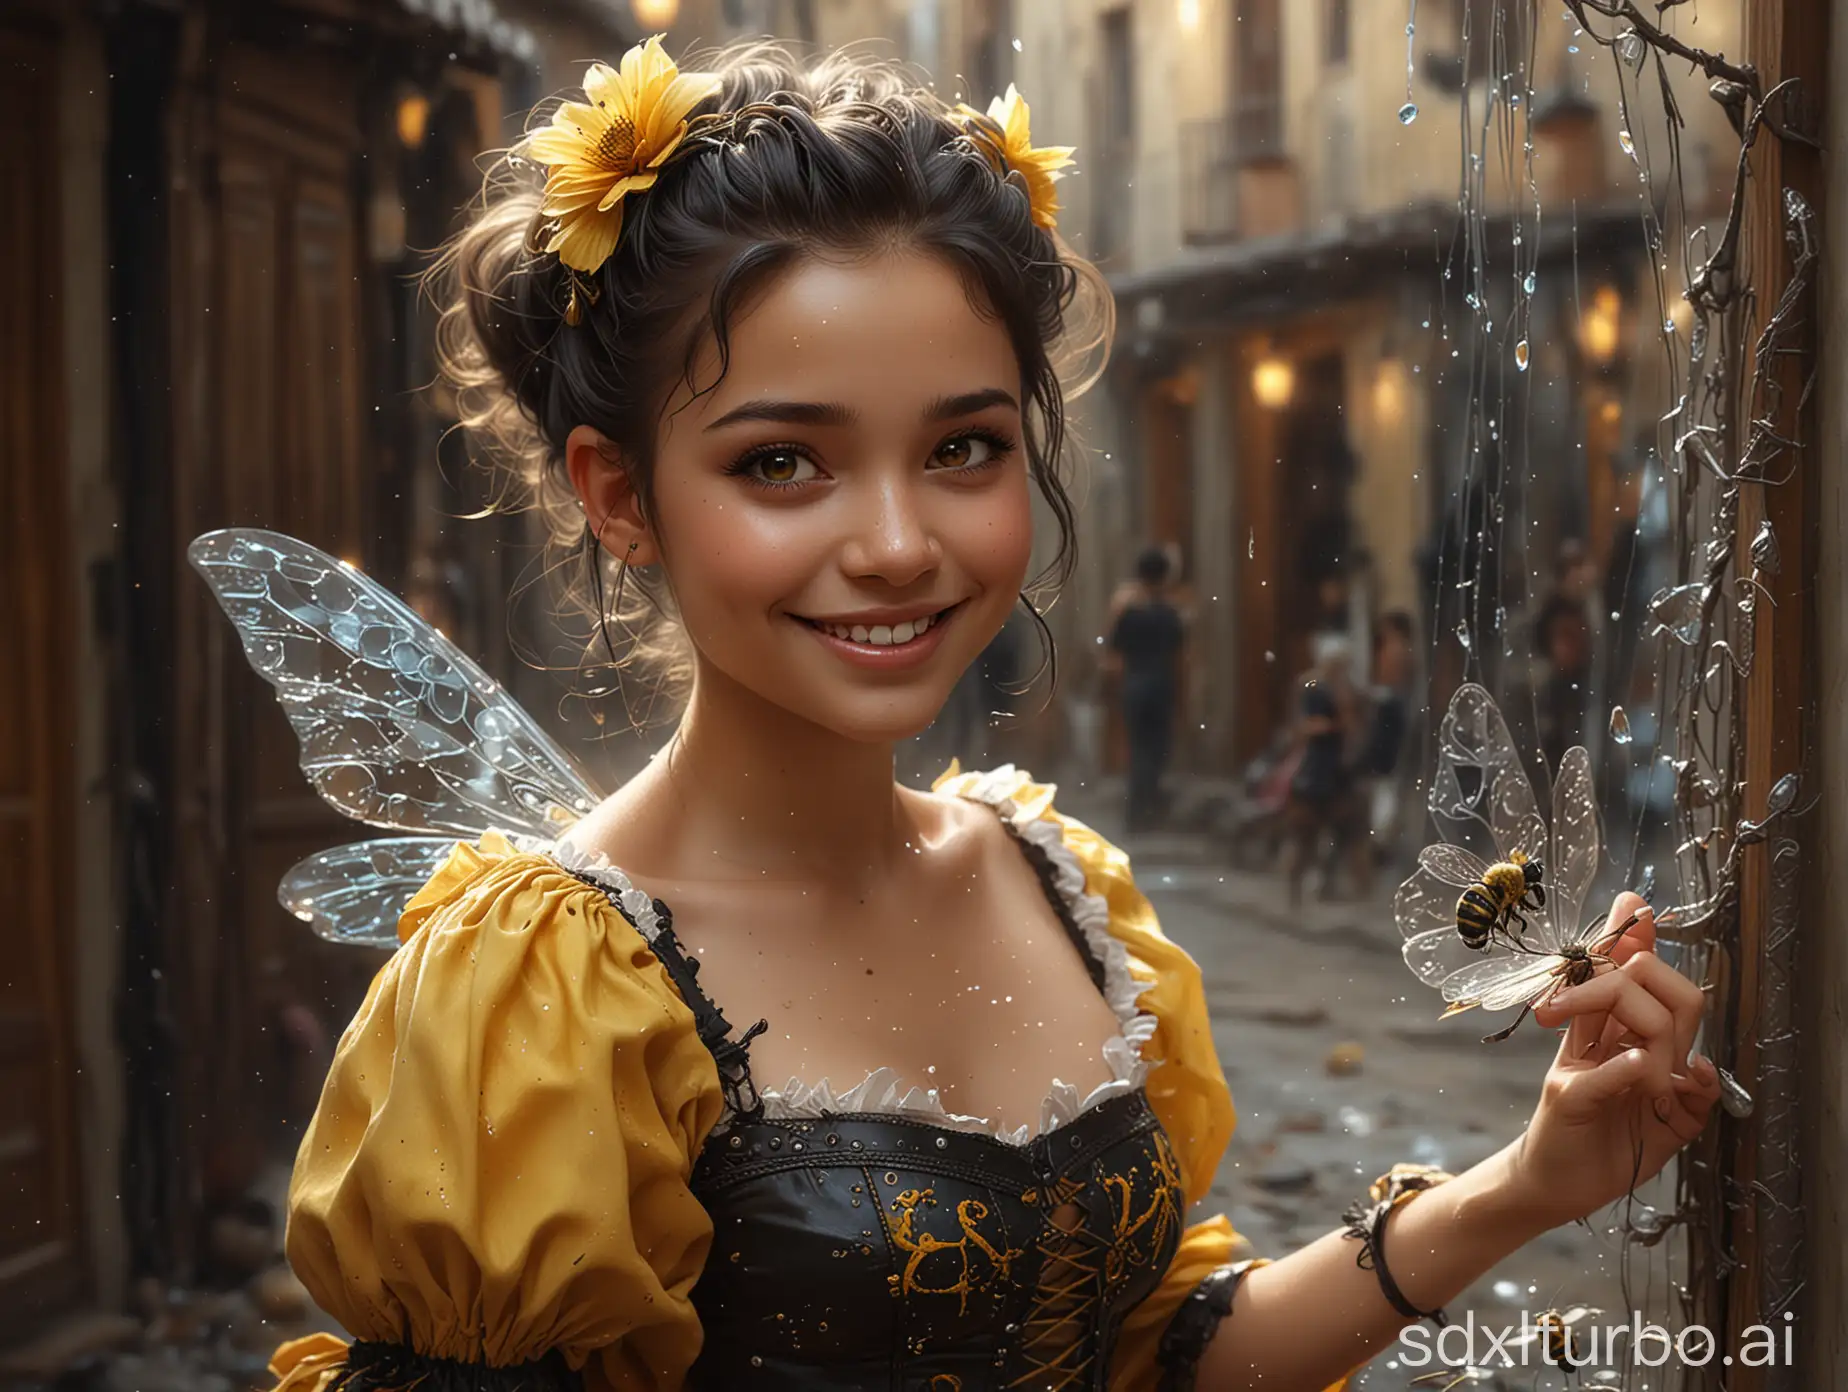 cute little women 20 years old in honey bee carnival dress, tanned skin, happy smile, full body, Luis Royo's house an ultra HD detailed painting, digital art, shaggy upswept black-yellow hair, realistic, Art by Daniela Uhlig and Tatiana Suarez, a tattooed punk beauty, bright, smile, cute little baby girl honey bee dress beautiful, splash, Glittering, cute and adorable, filigree, rim lighting, lights, extremely, magic, surreal, fantasy, digital art, Wlop, Broken Glass effect, stunning